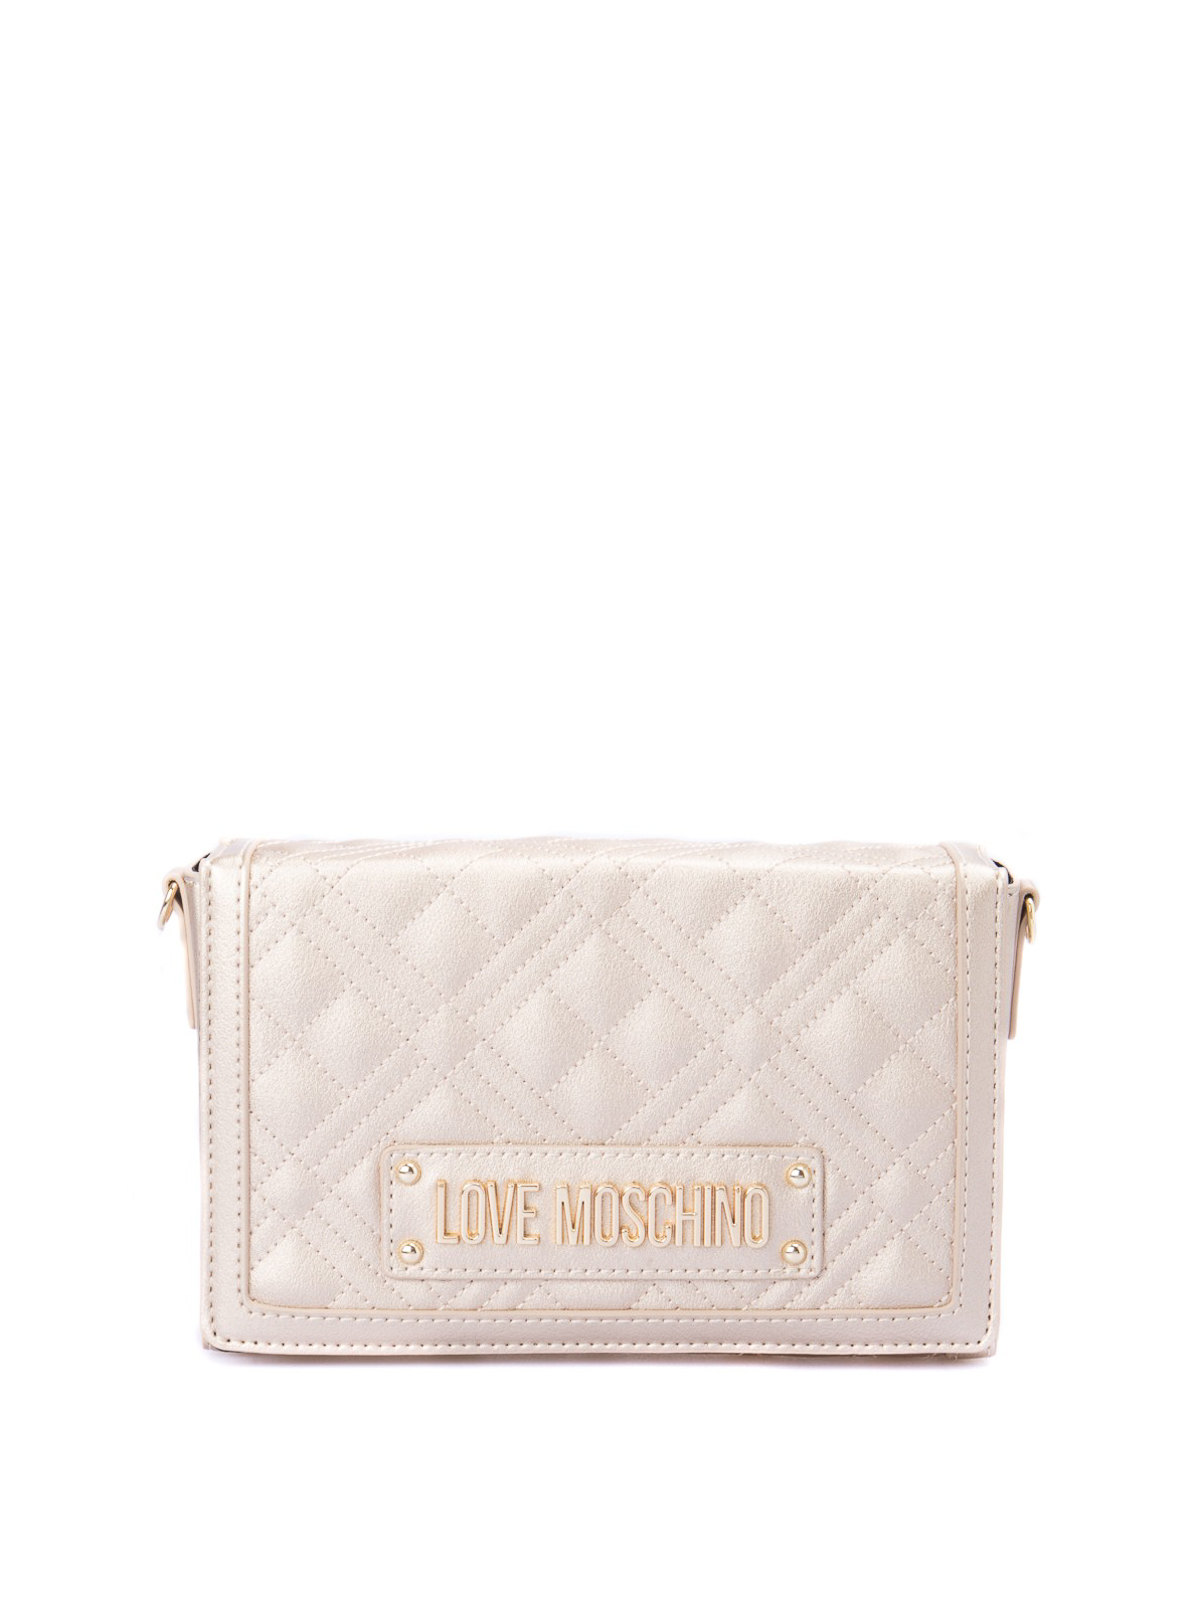 LOVE MOSCHINO LAMINATED FAUX LEATHER CROSS BODY BAG